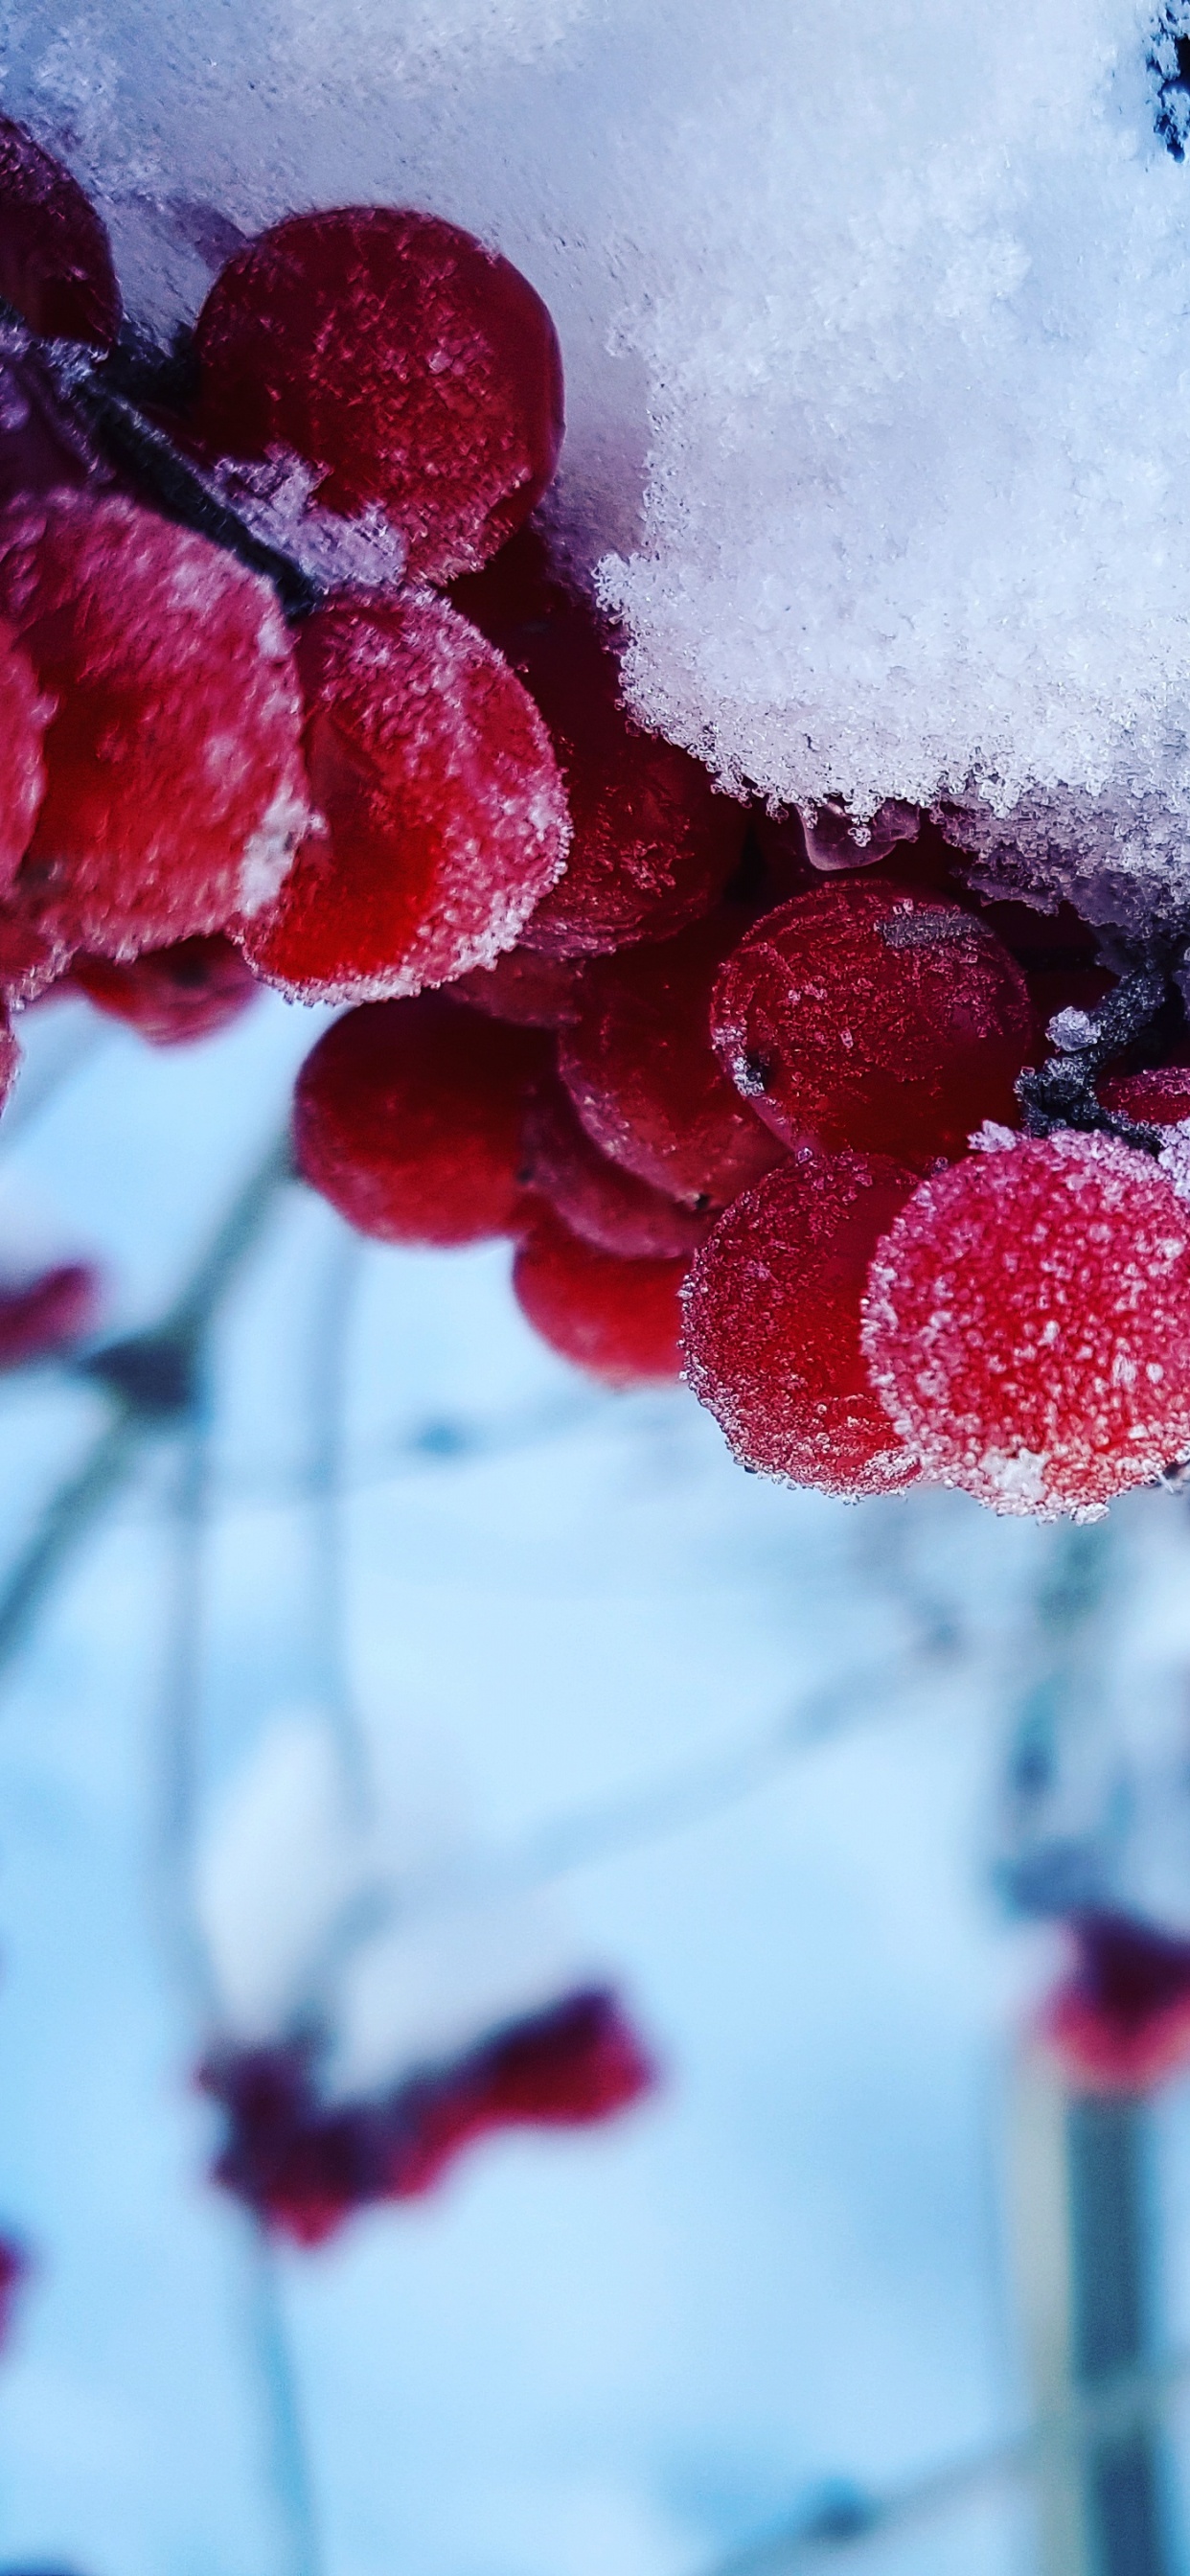 Fruits Ronds Rouges Recouverts de Neige. Wallpaper in 1242x2688 Resolution